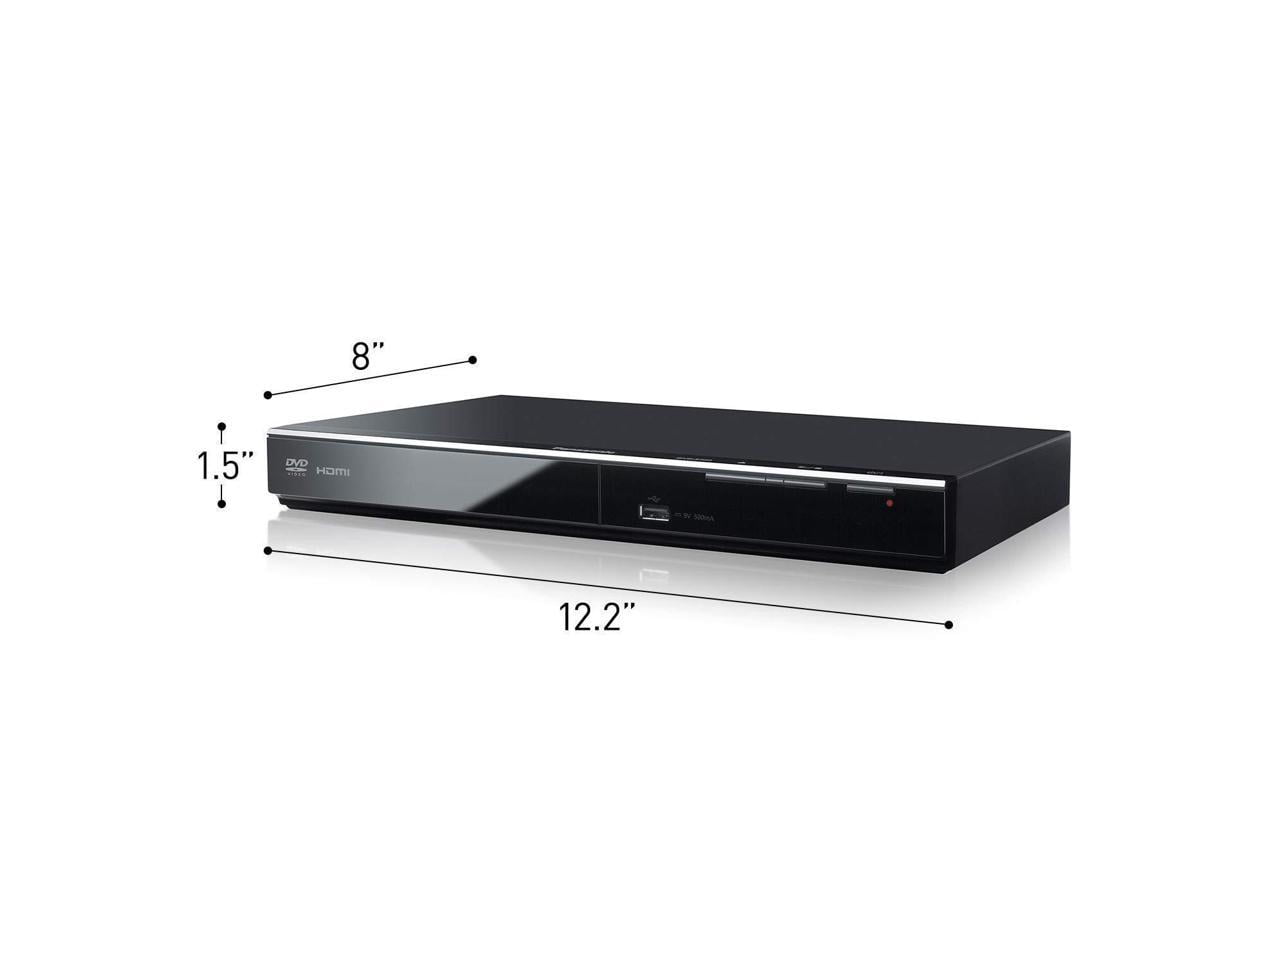 Panasonic DVD Player with Dolby Digital Sound, 1080p HD Upscaling, HDMI &  USB Connections - DVD-S700